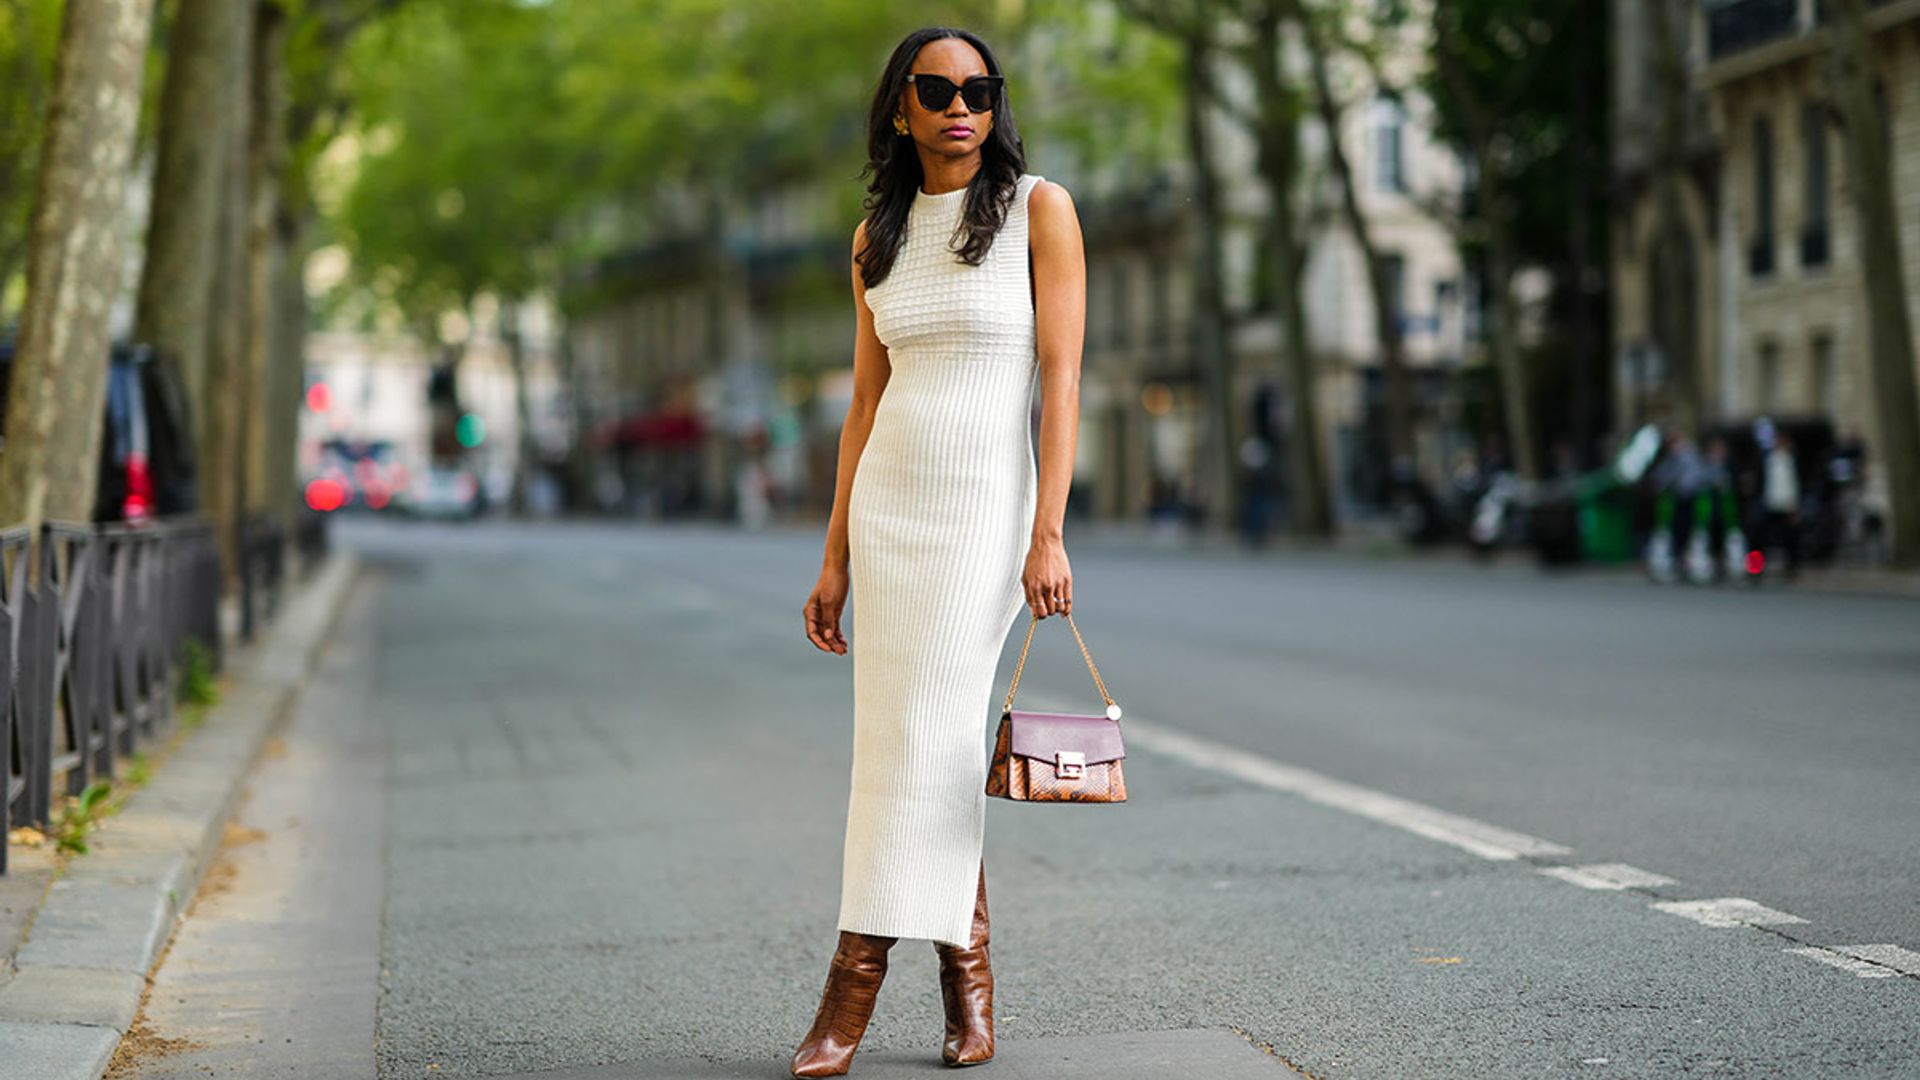 10 minimalist outfits that you'll want to recreate this season